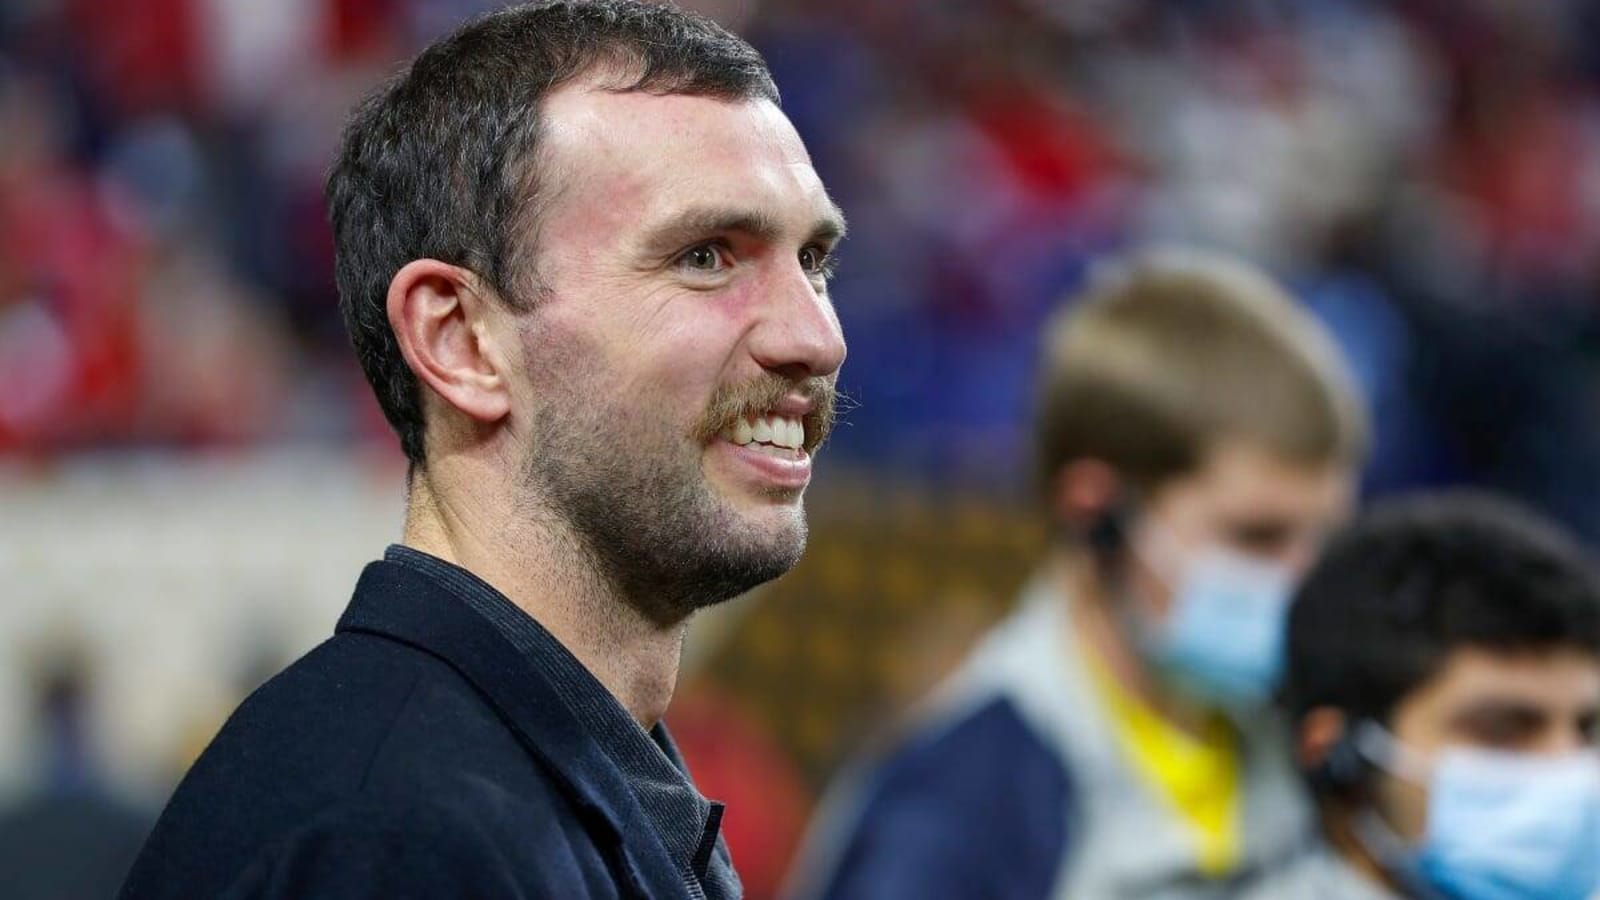 Washington Commanders reportedly attempted to lure Andrew Luck out of retirement